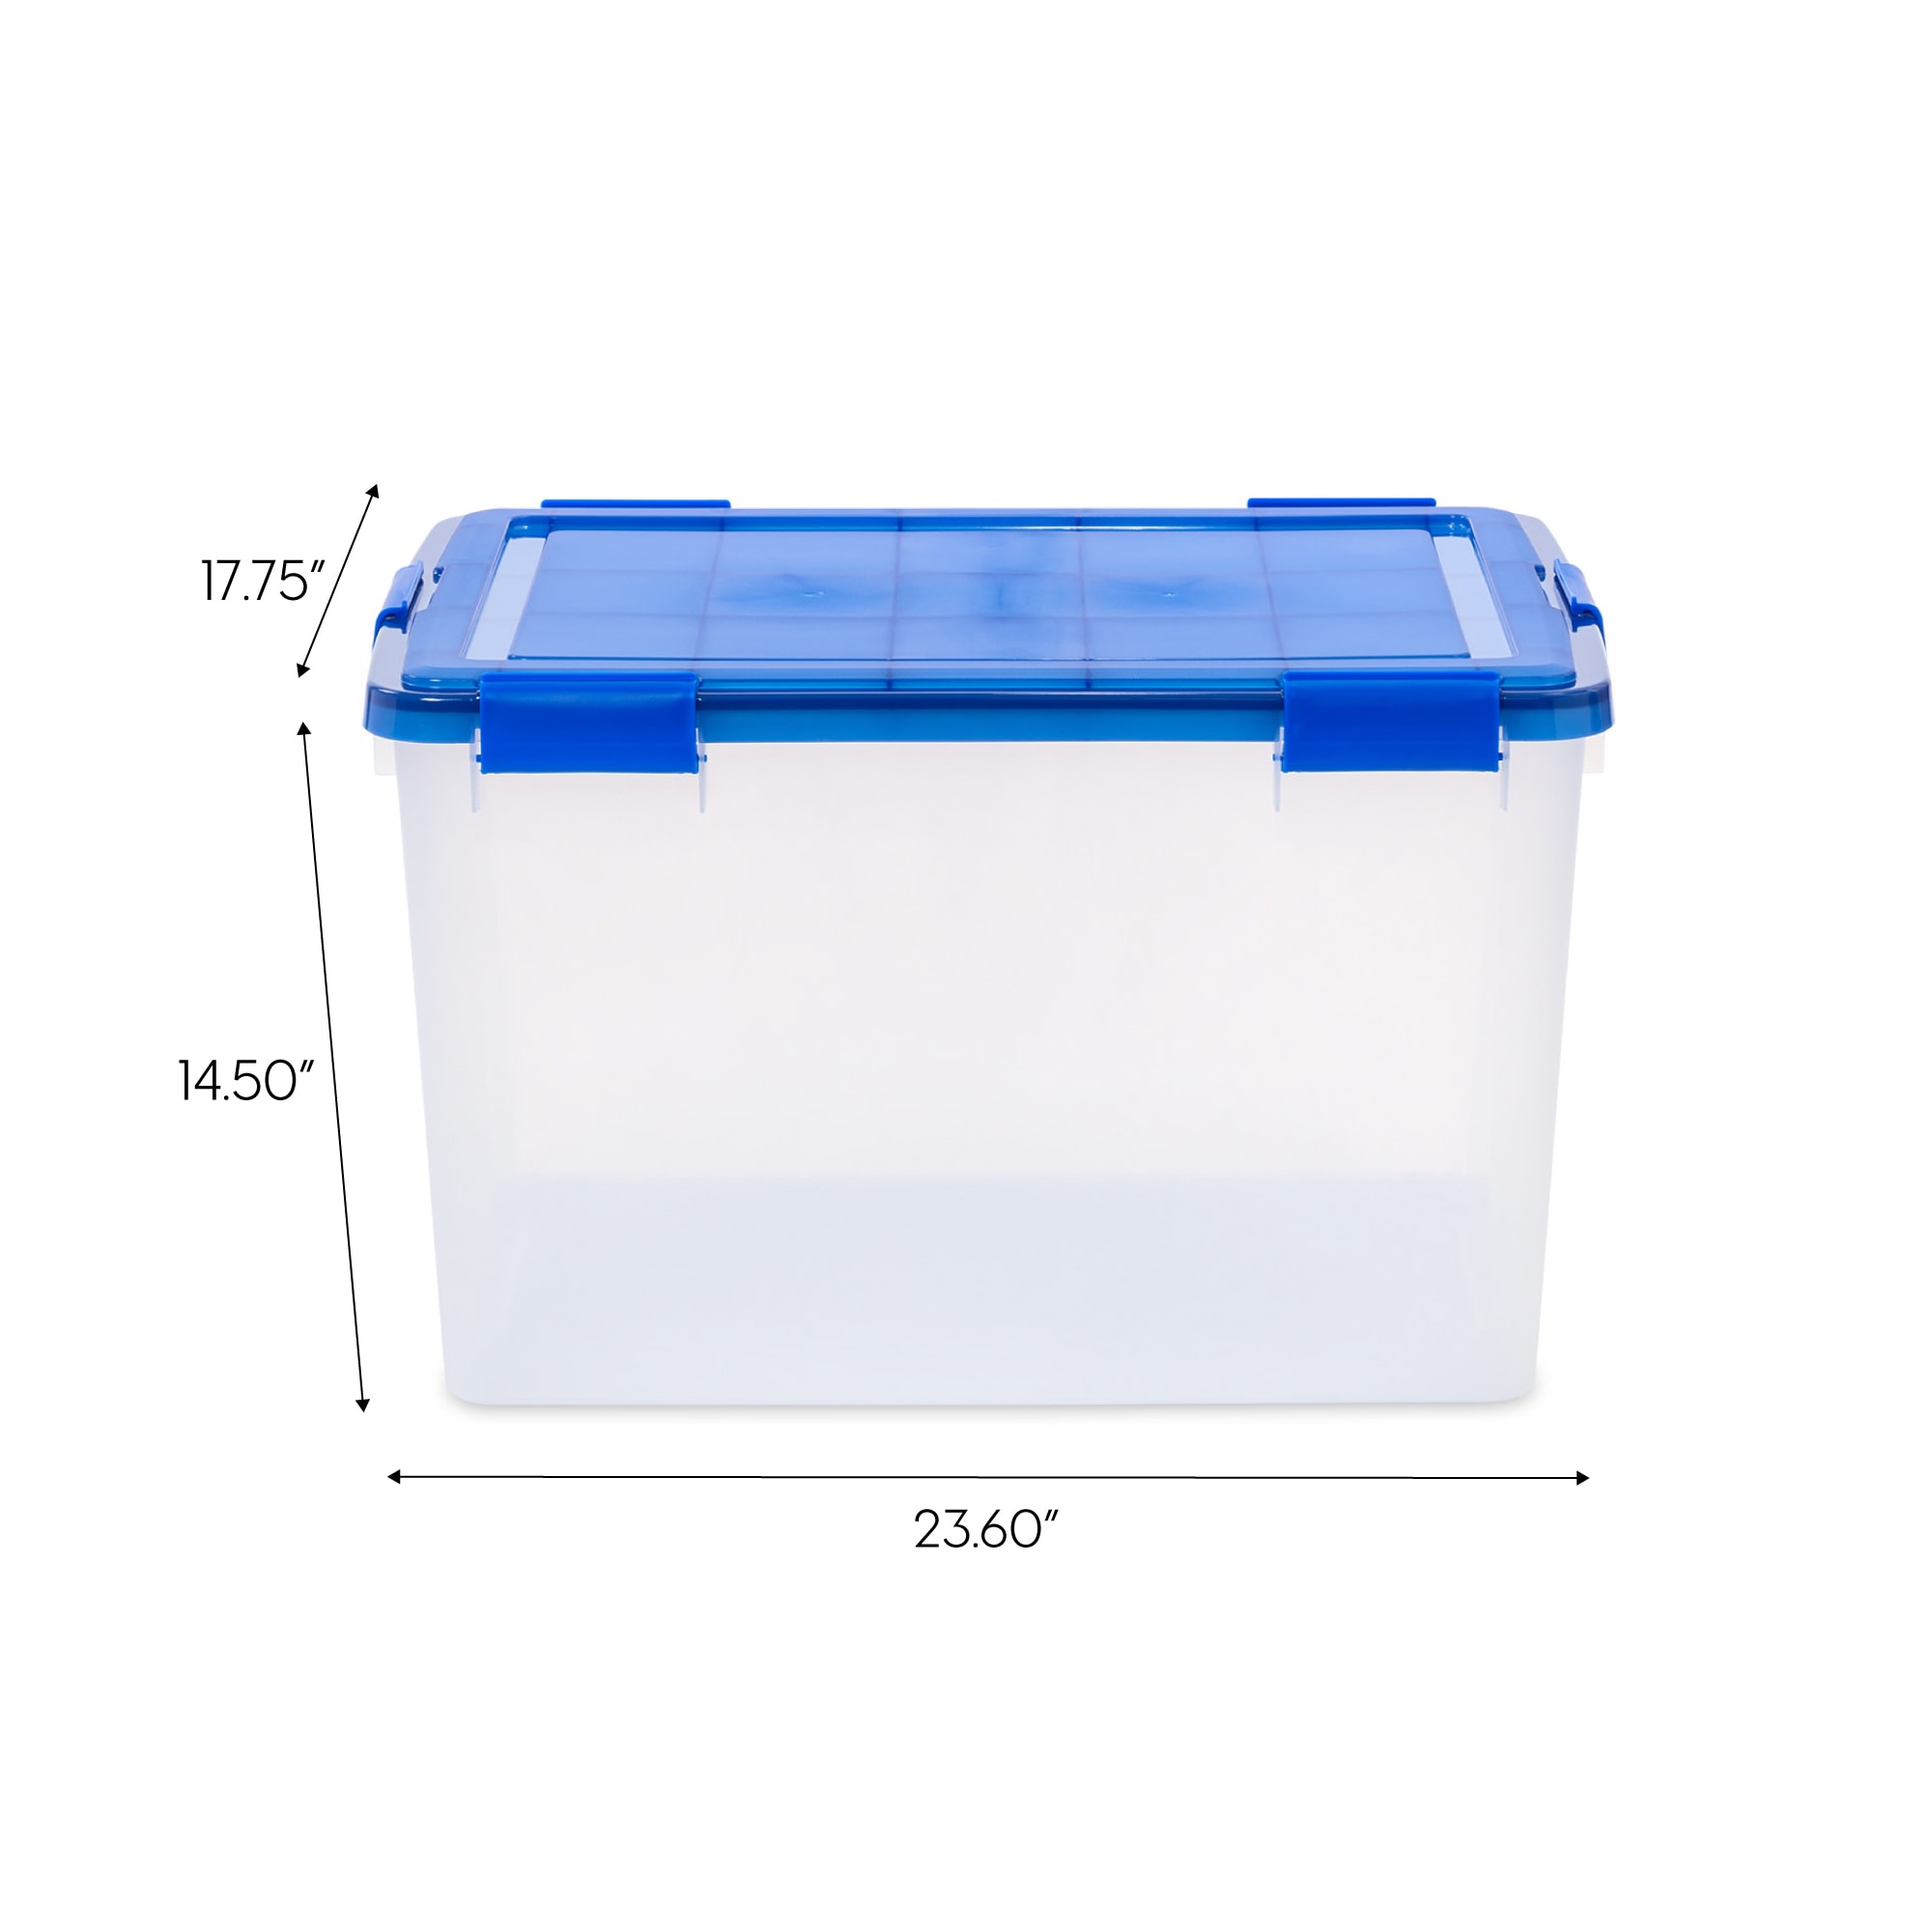 Nicole Home Collection Storage Container with Lid Large Rectangular Blue 34 oz